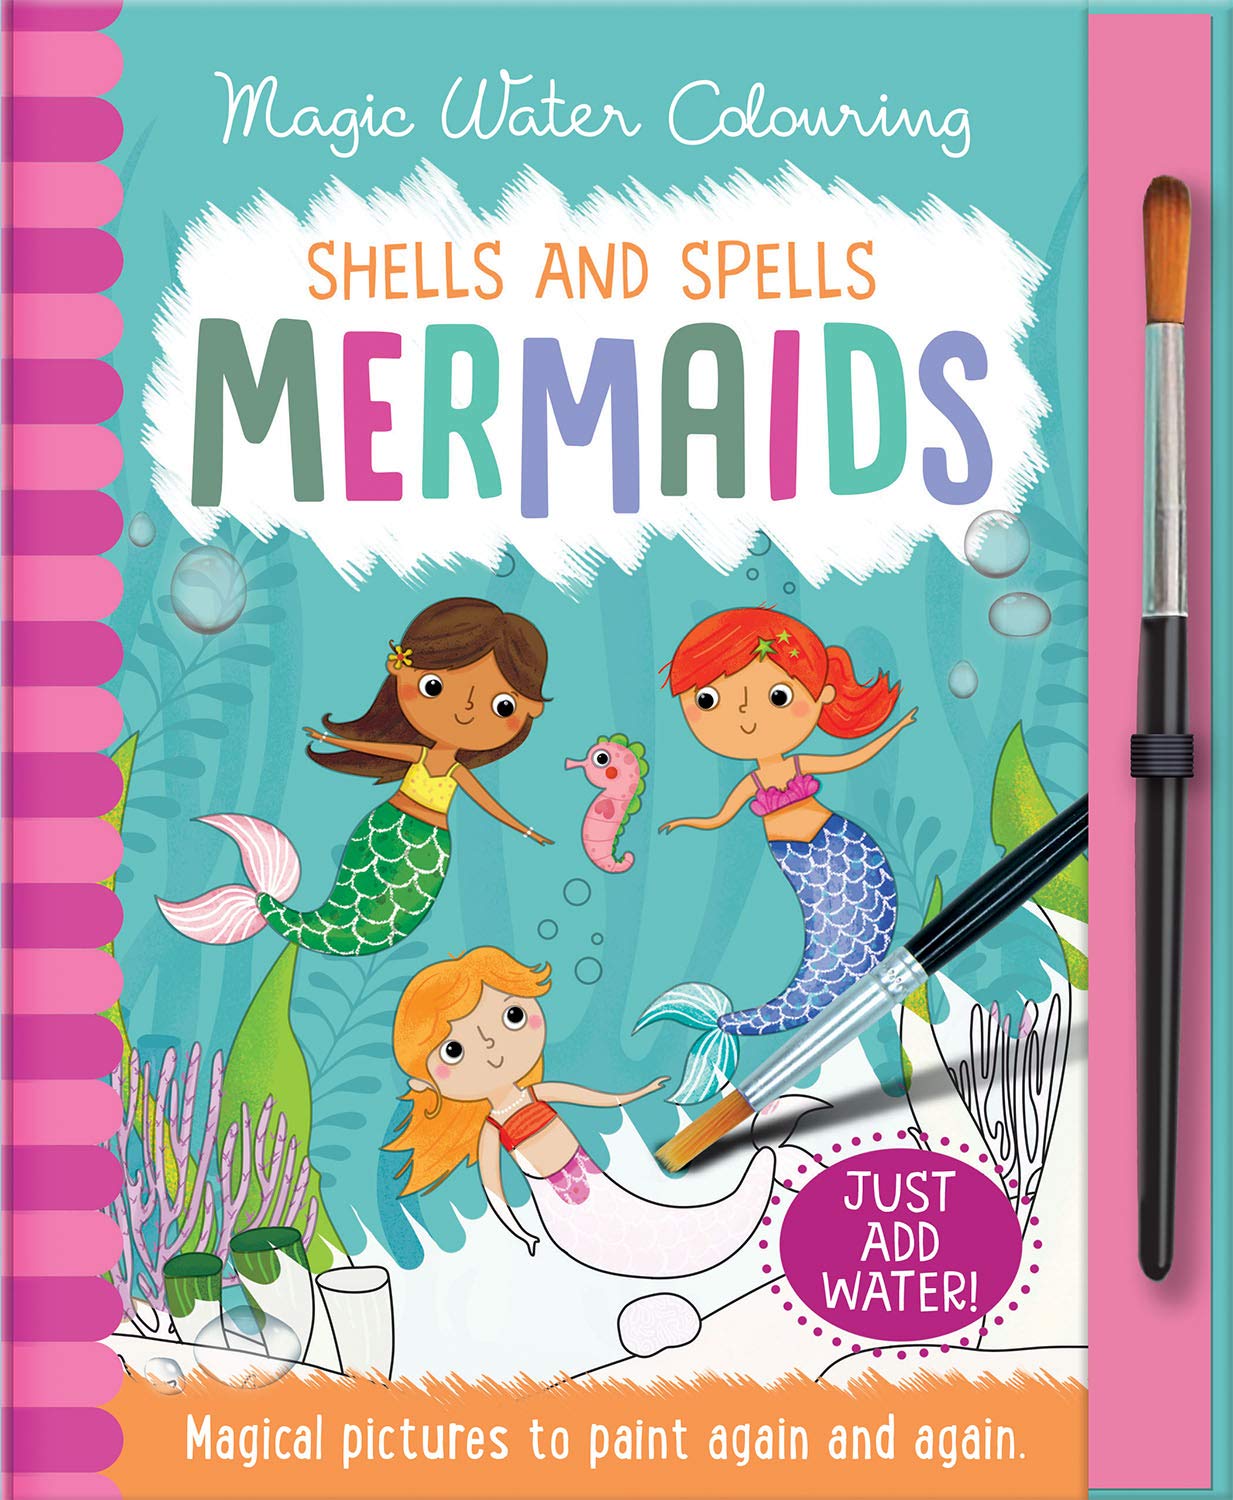 Shells and Spells - Mermaids (Magic Water Colouring)